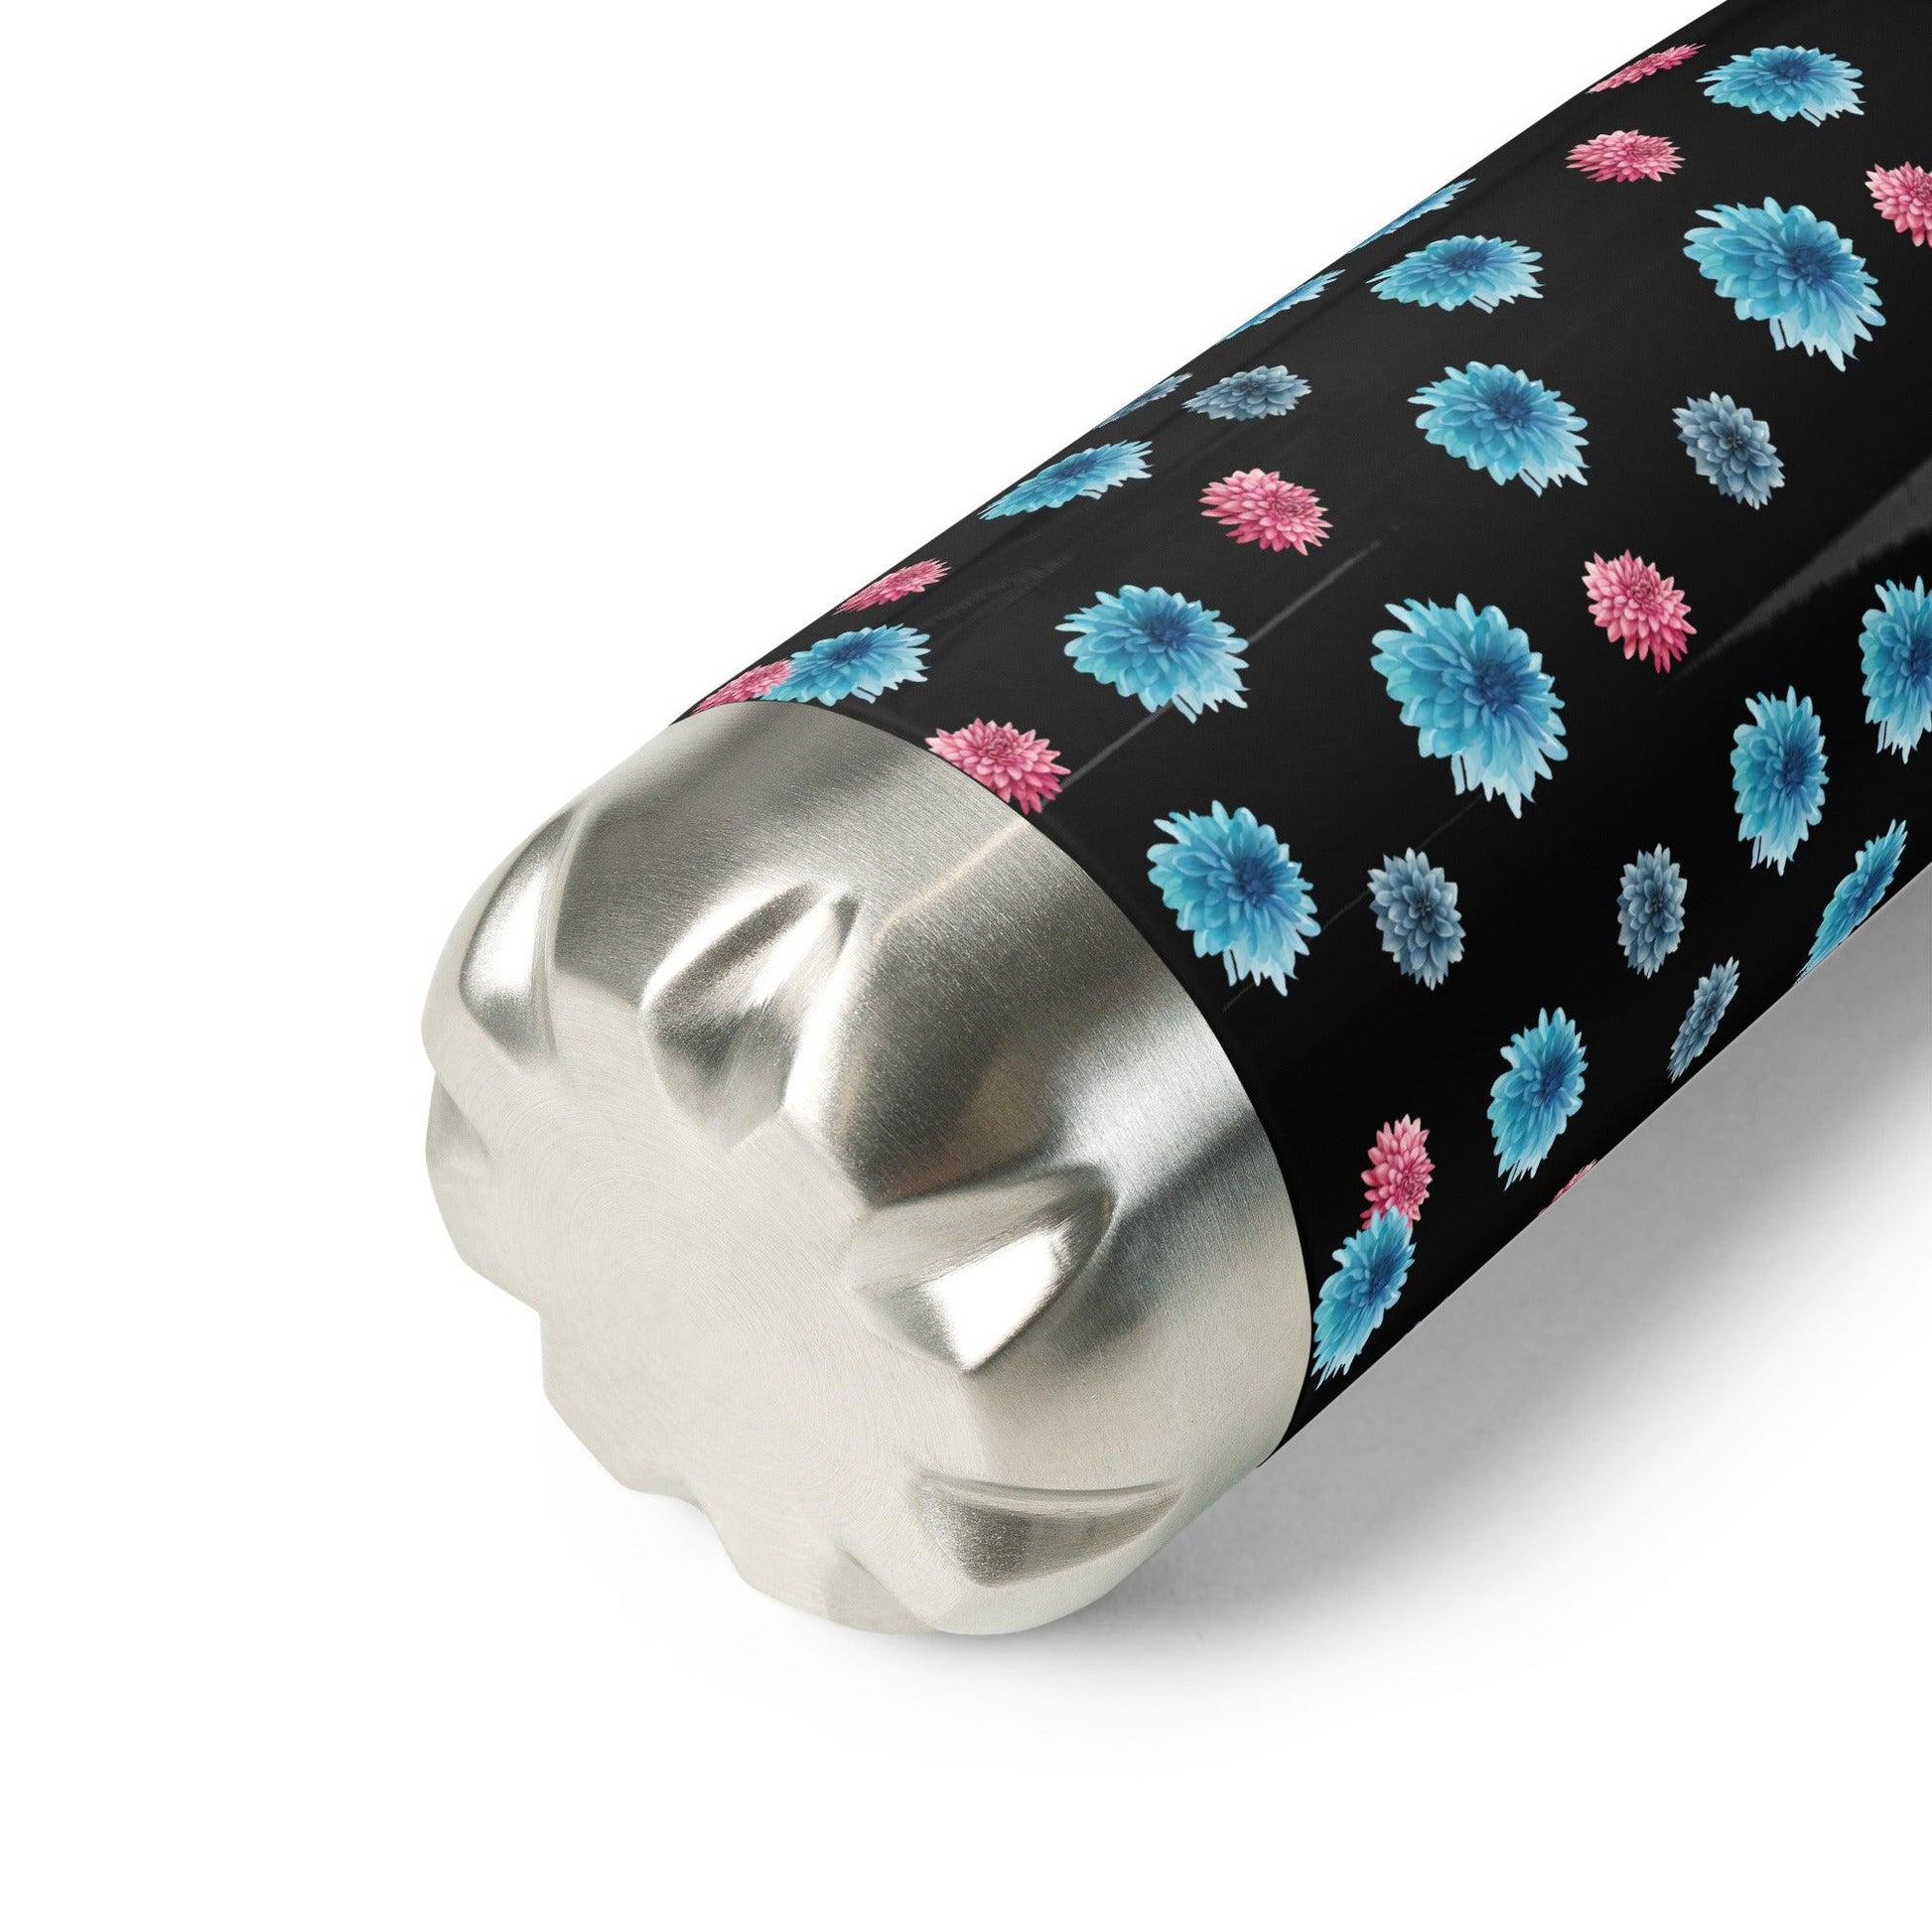 Dahlia Stainless Steel Water Bottle - Clover Collection Shop